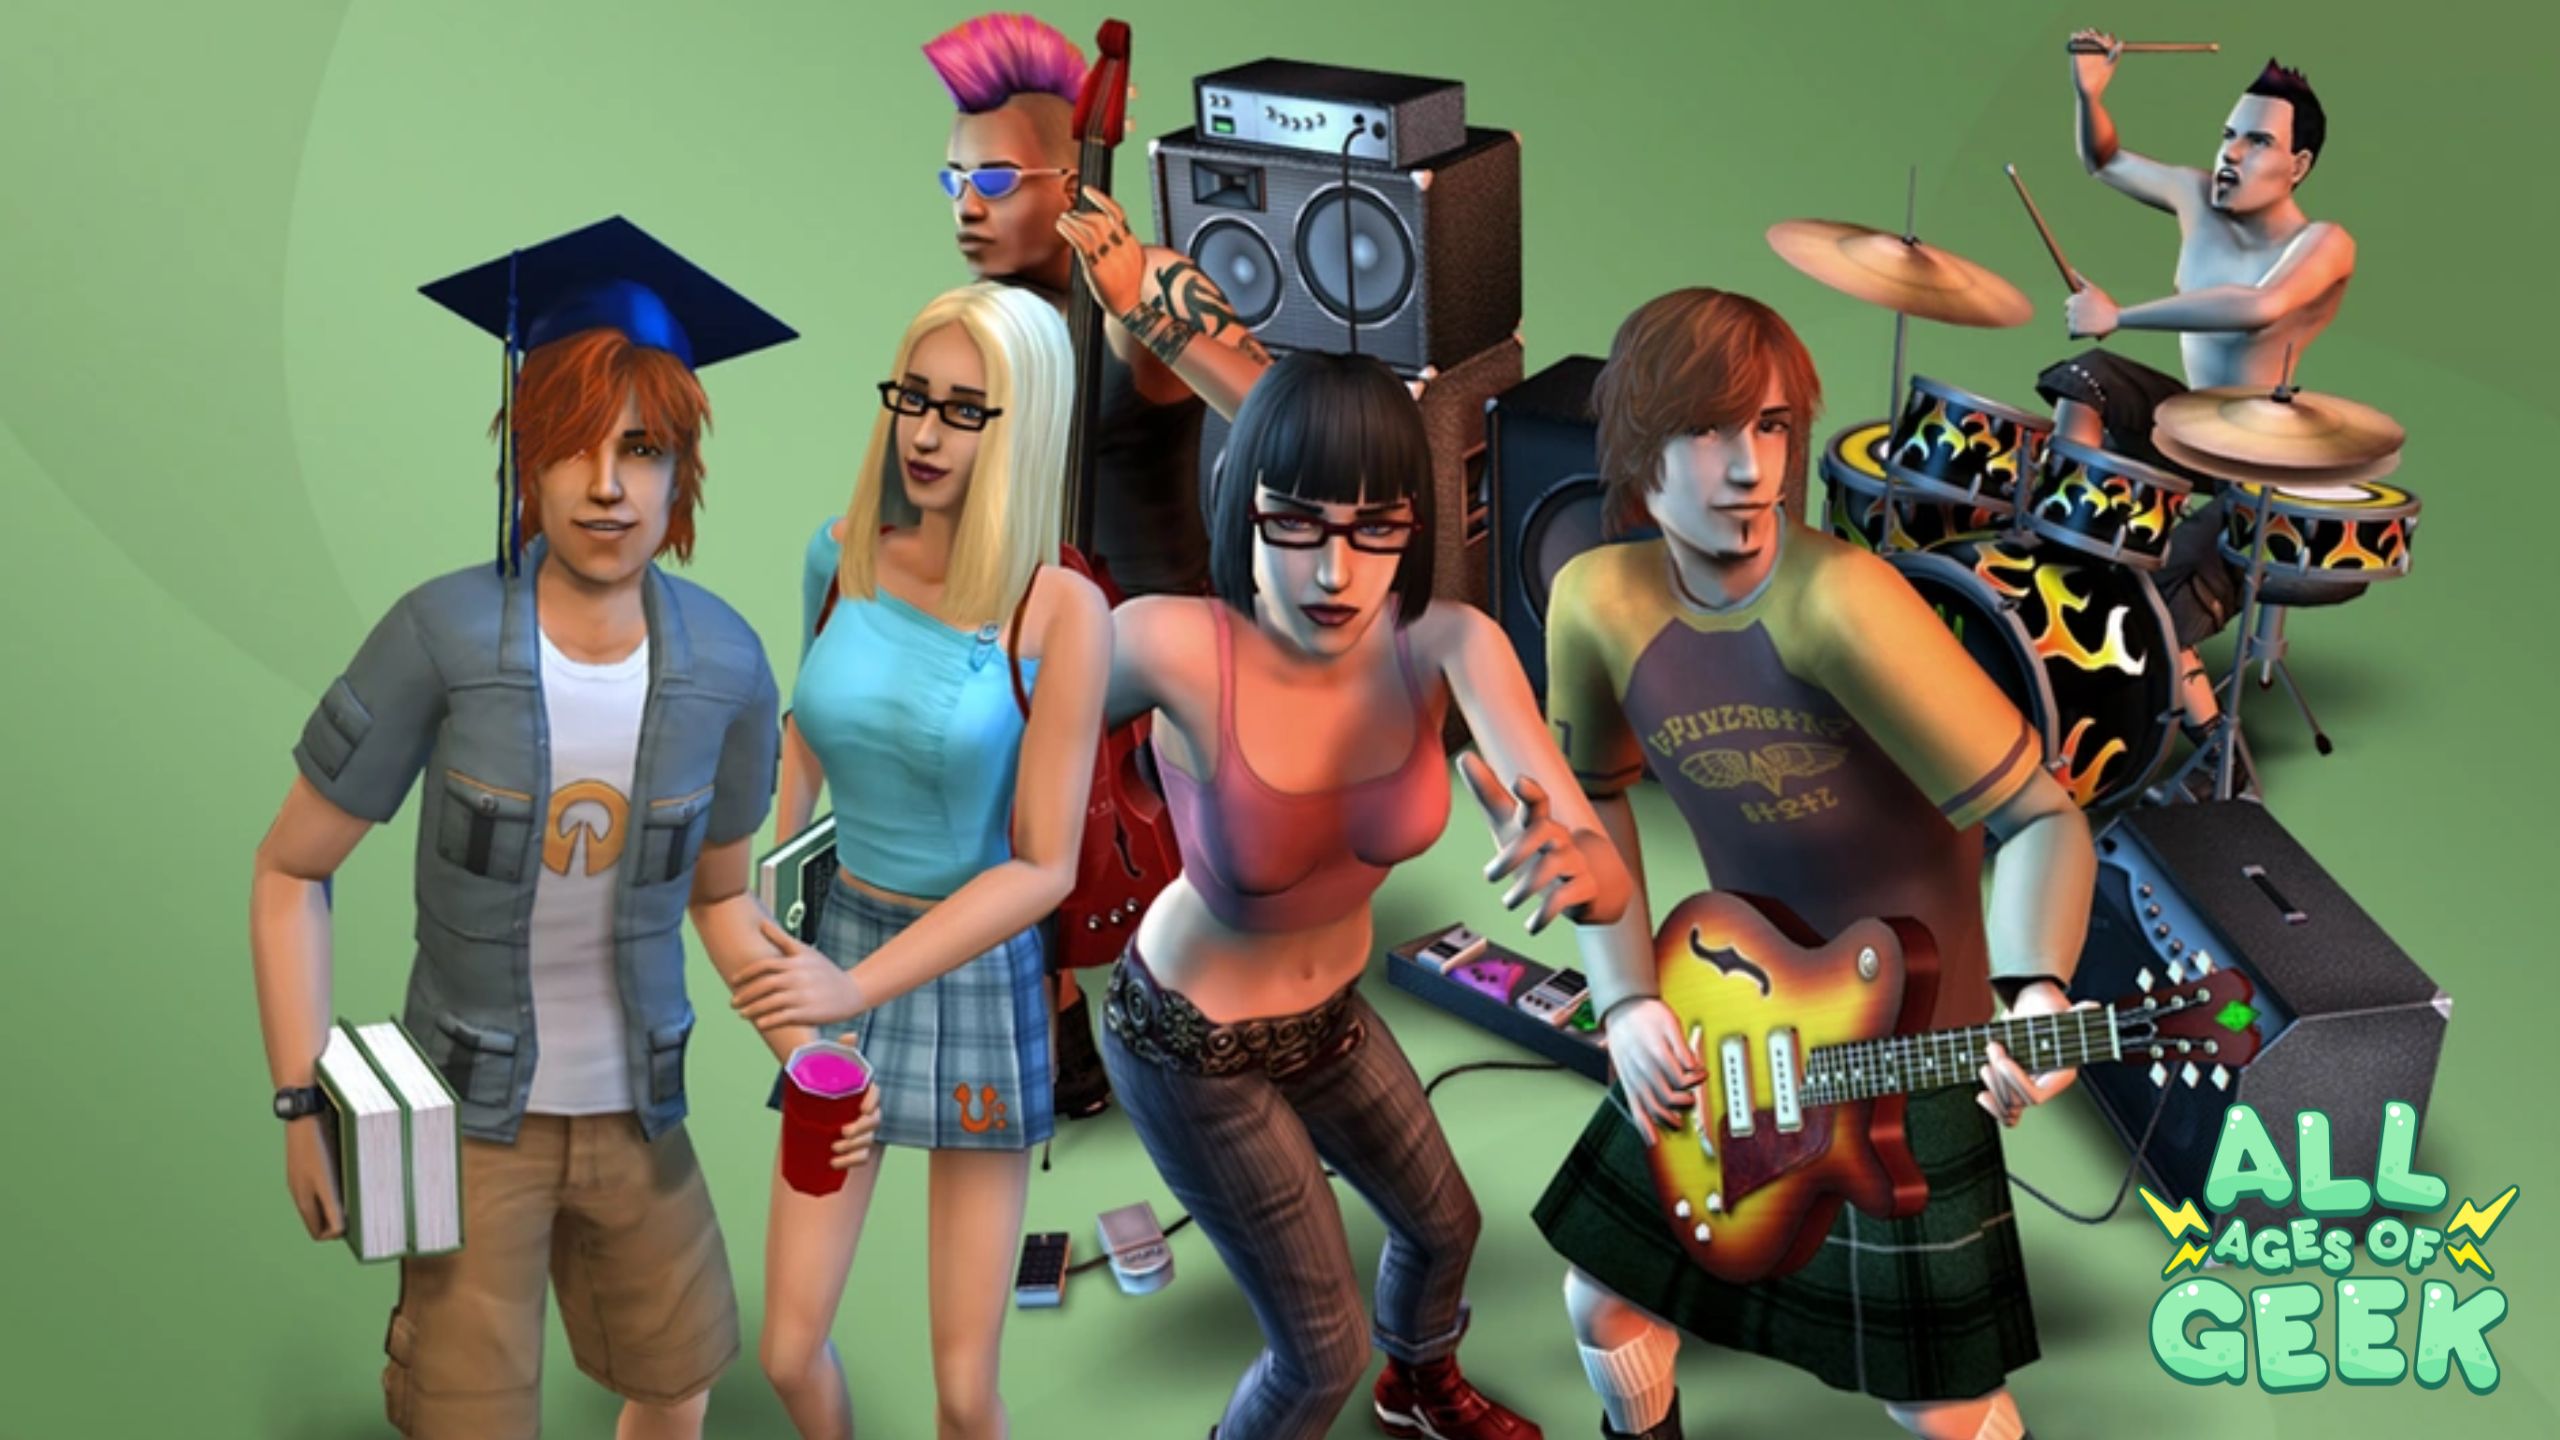 A group of Sims enjoying college life with music and festivities, featuring a graduate, a student holding a drink, and a band performing in the background. The All Ages of Geek logo is visible in the bottom right corner.